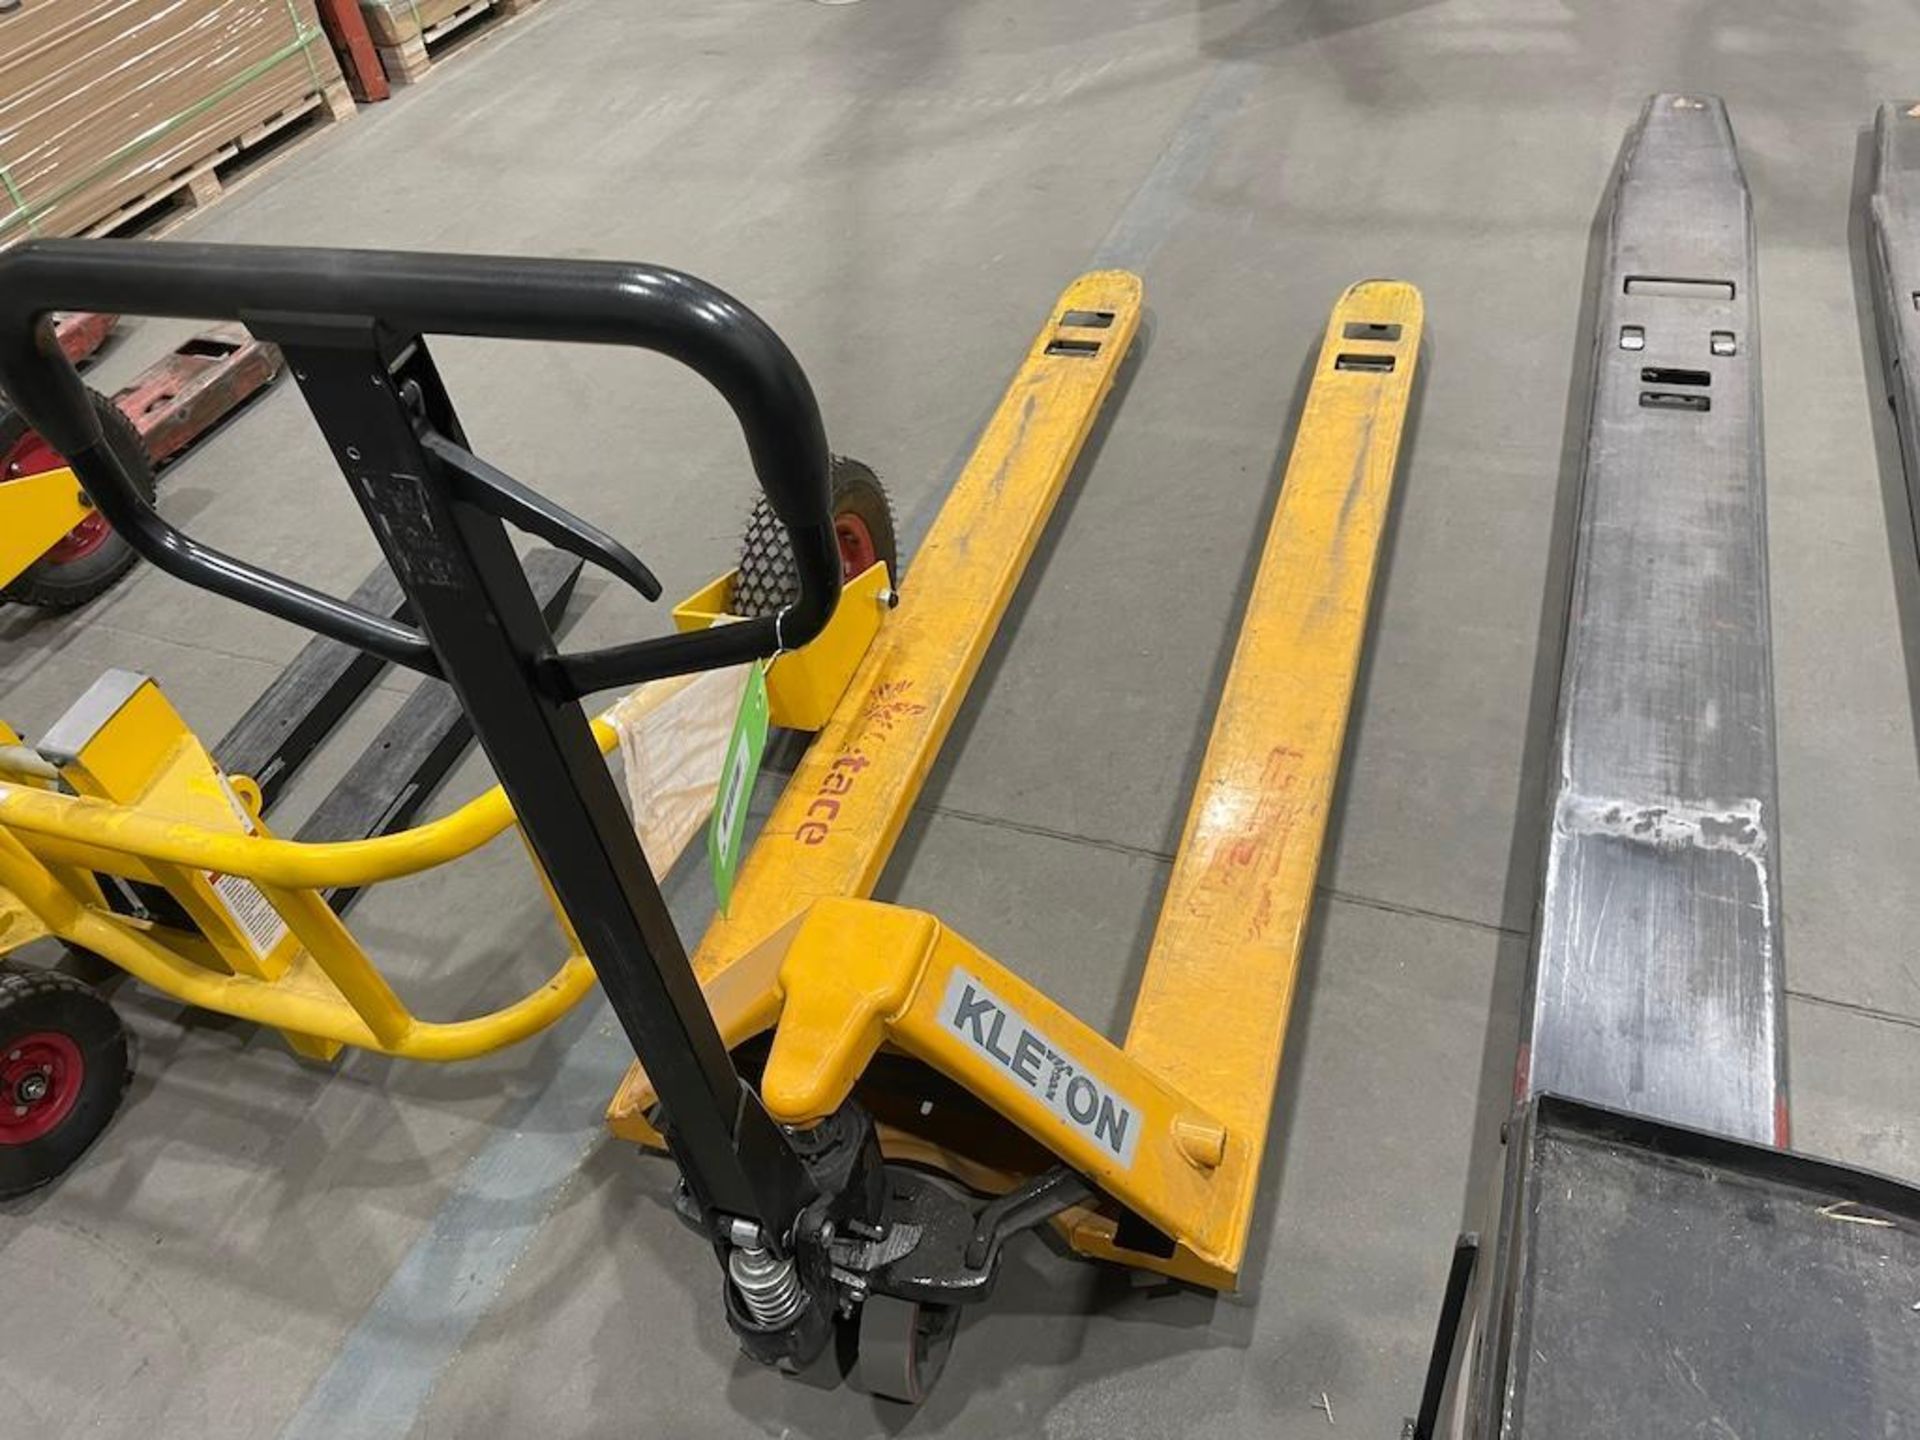 KLETON PALLET JACK, 6 FT FORKS [TROIS RIVIERES]*PLEASE NOTE, EXCLUSIVE RIGGING FEE OF $100 WILL BE A - Image 2 of 2